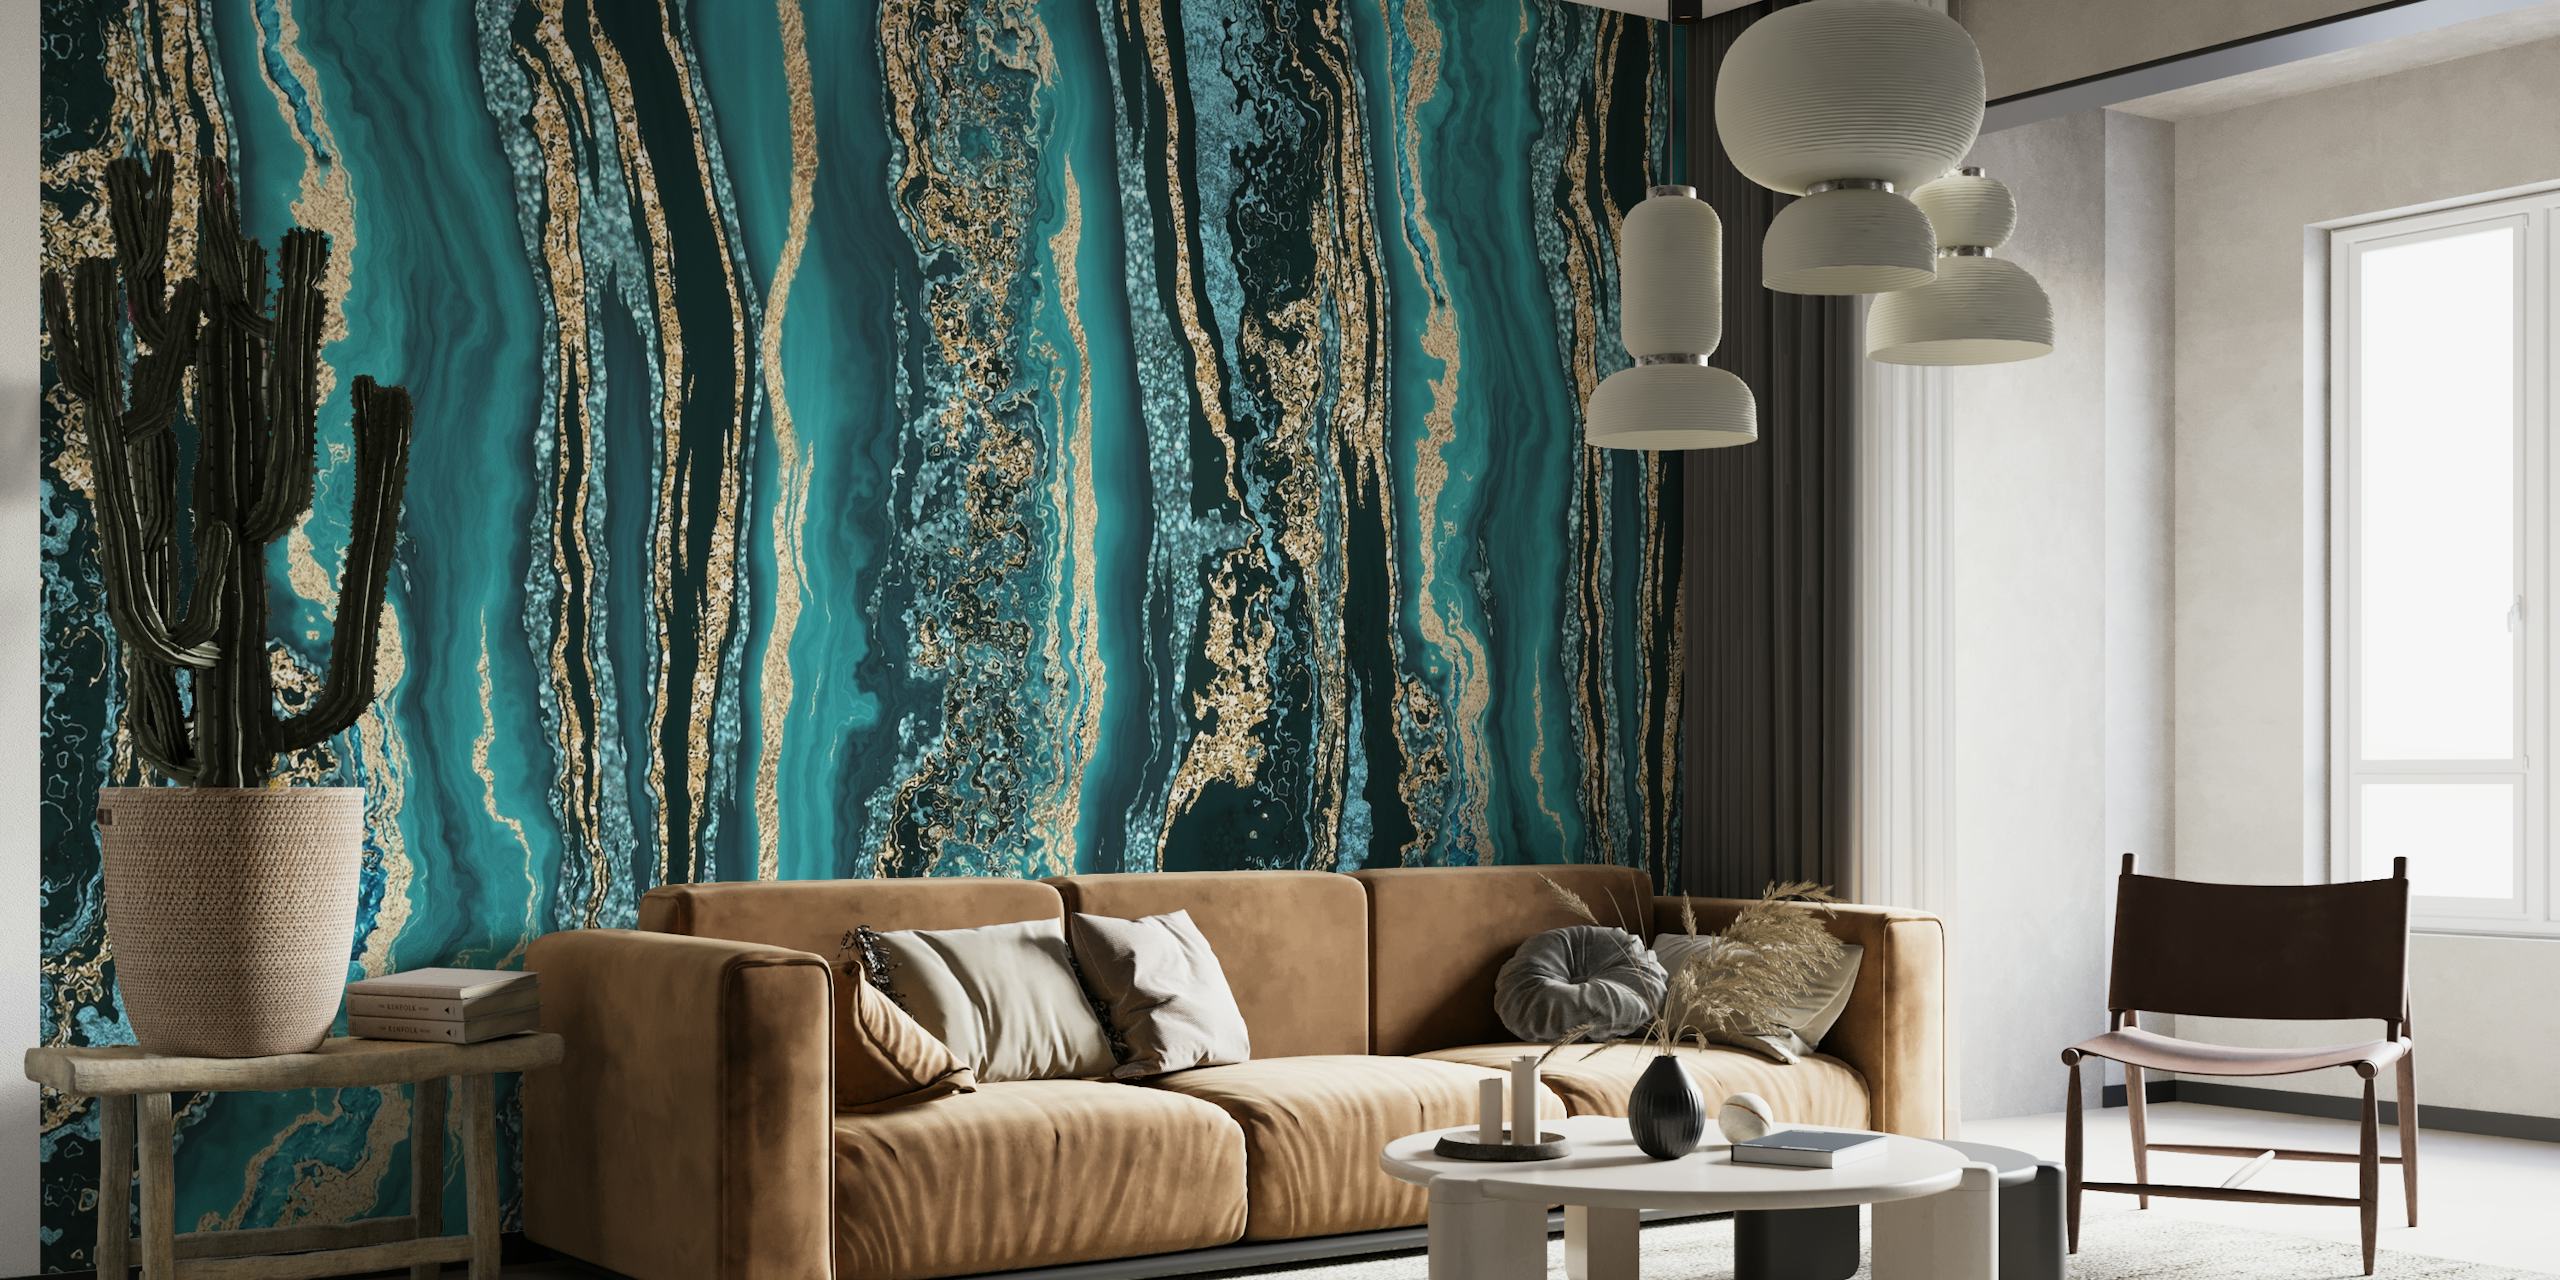 Luxurious Teal and Gold Gemstone-Inspired Wallpaper